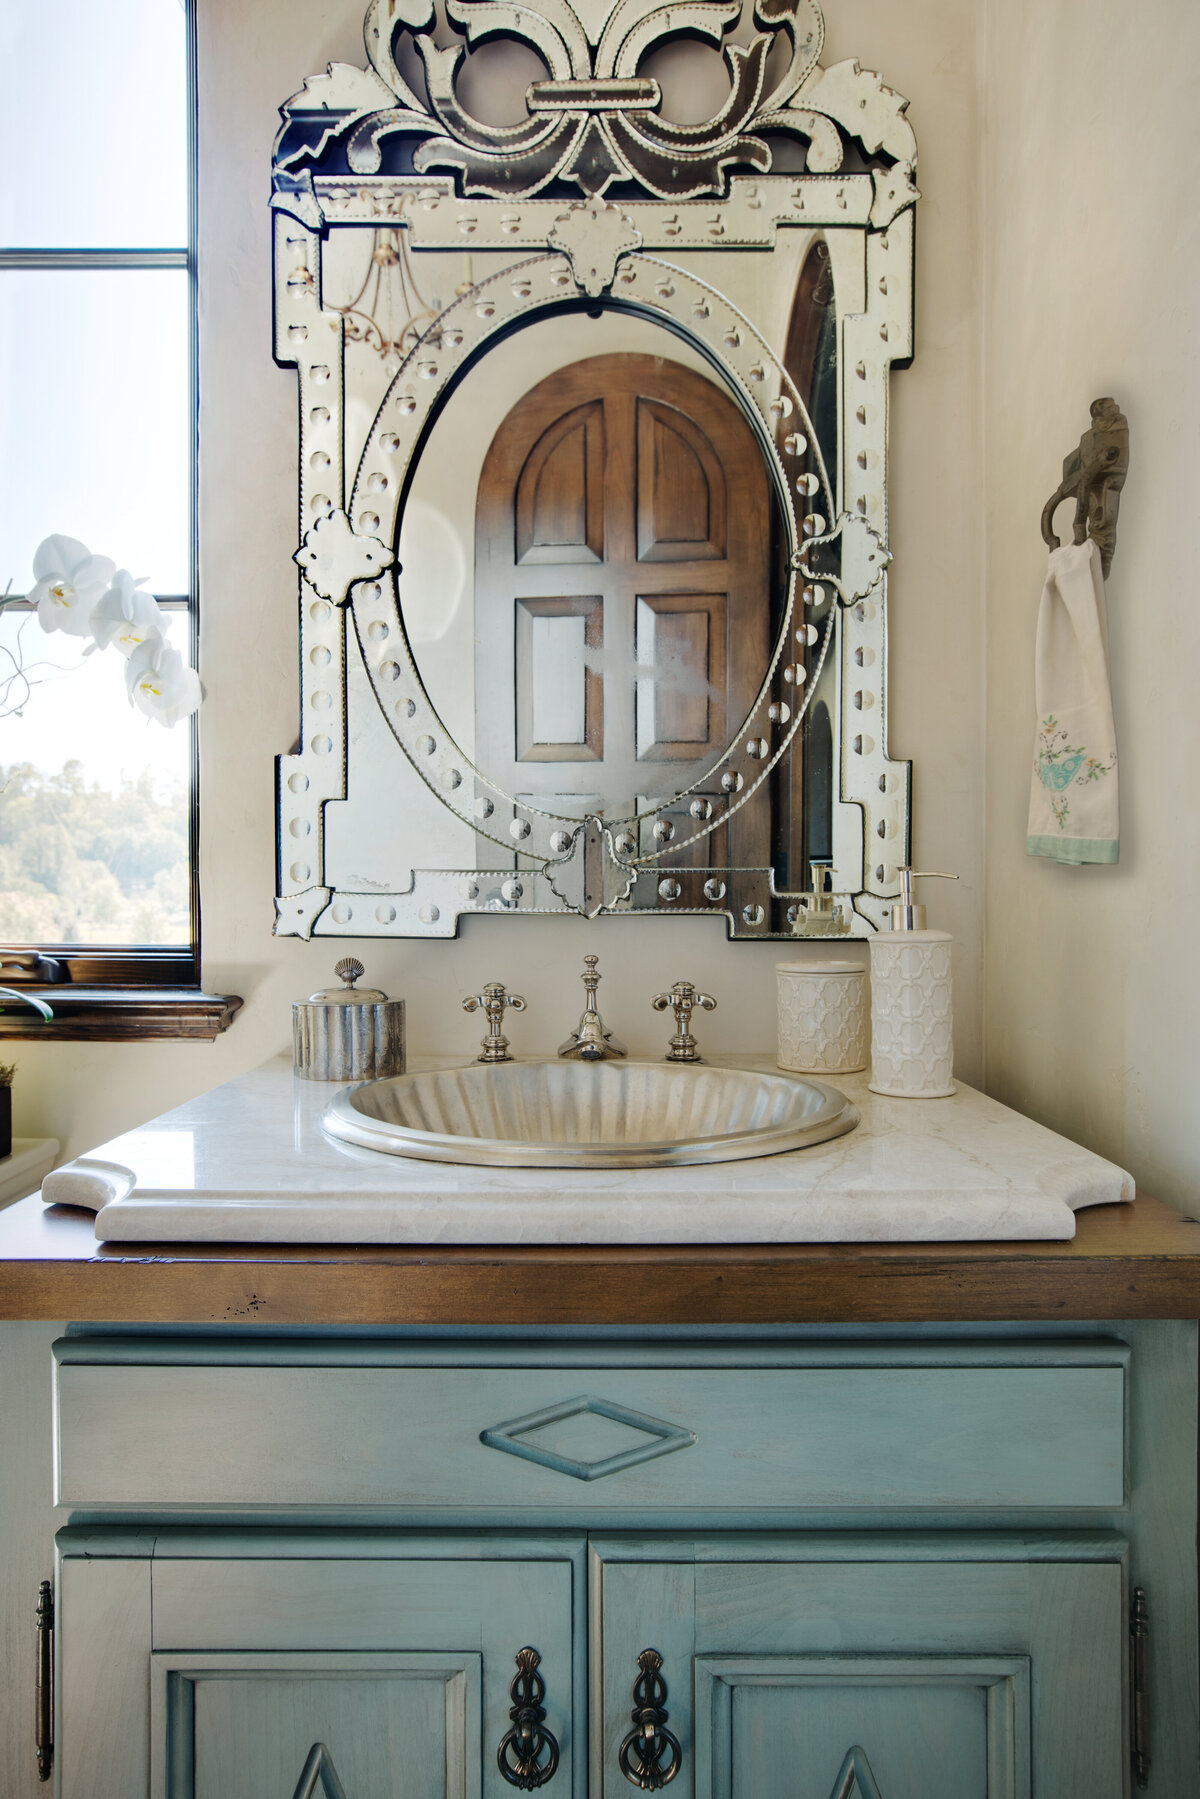 Panageries Residential Interior Design | Italian Country Villa Powder Bath Vanity with Charming Sink, Hardware, and Mirror Details